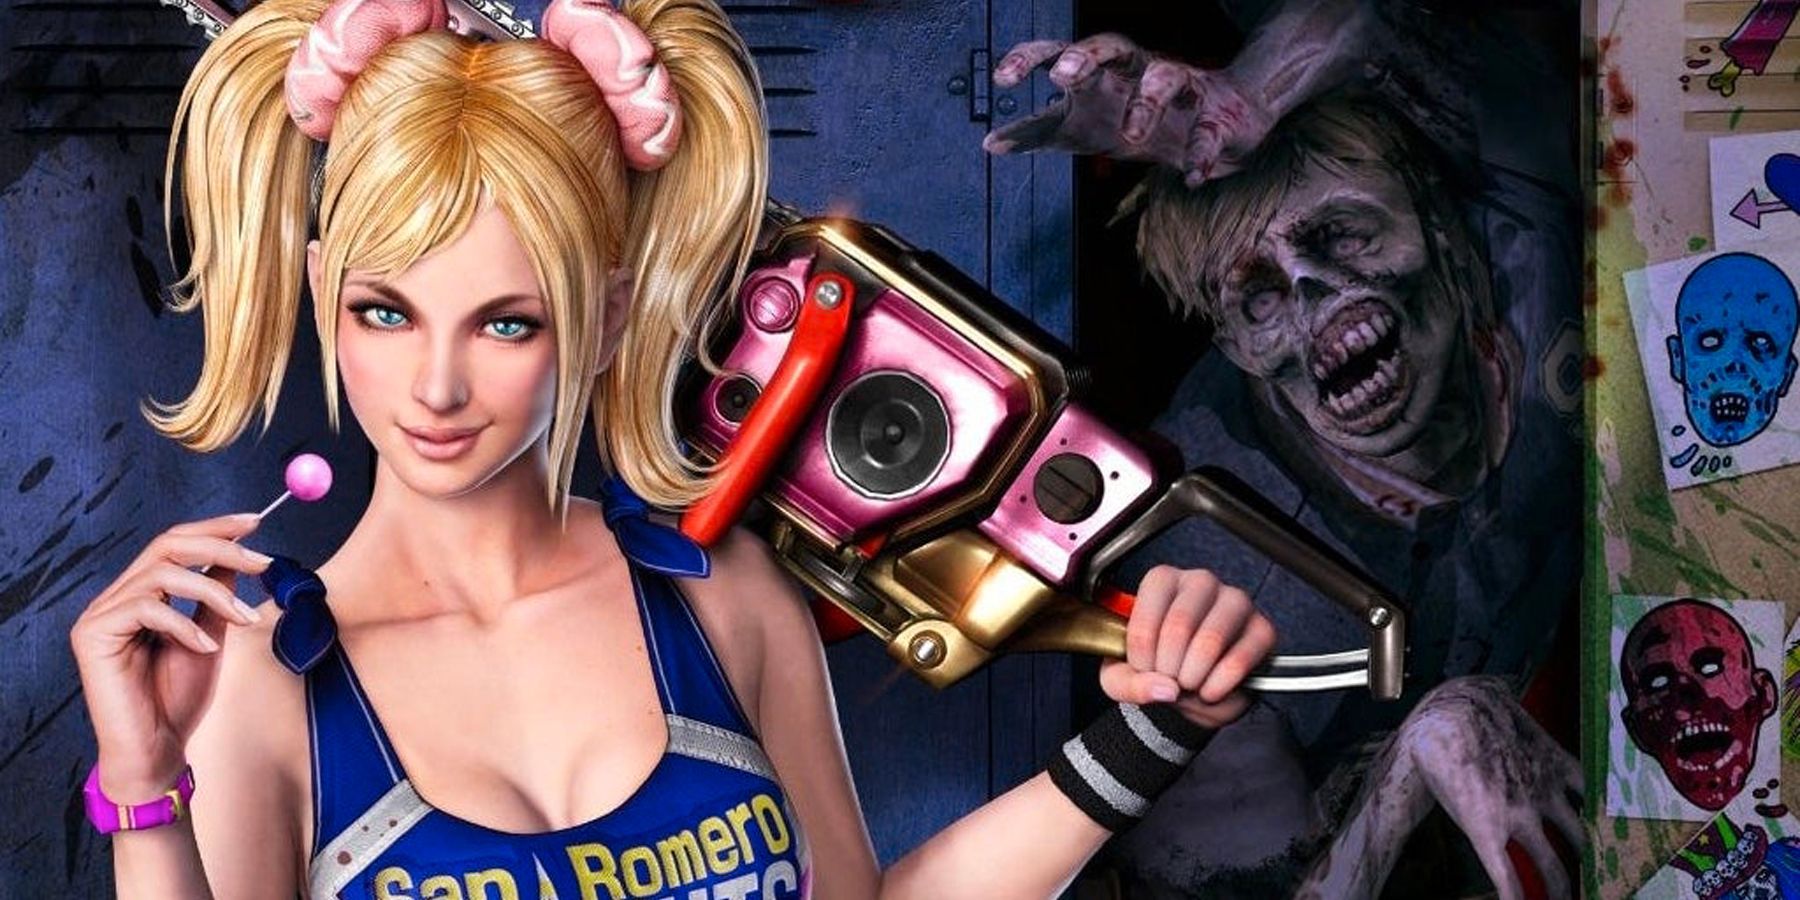 Juliet Starling and a zombie in promotional art for Lollipop Chainsaw (2012)